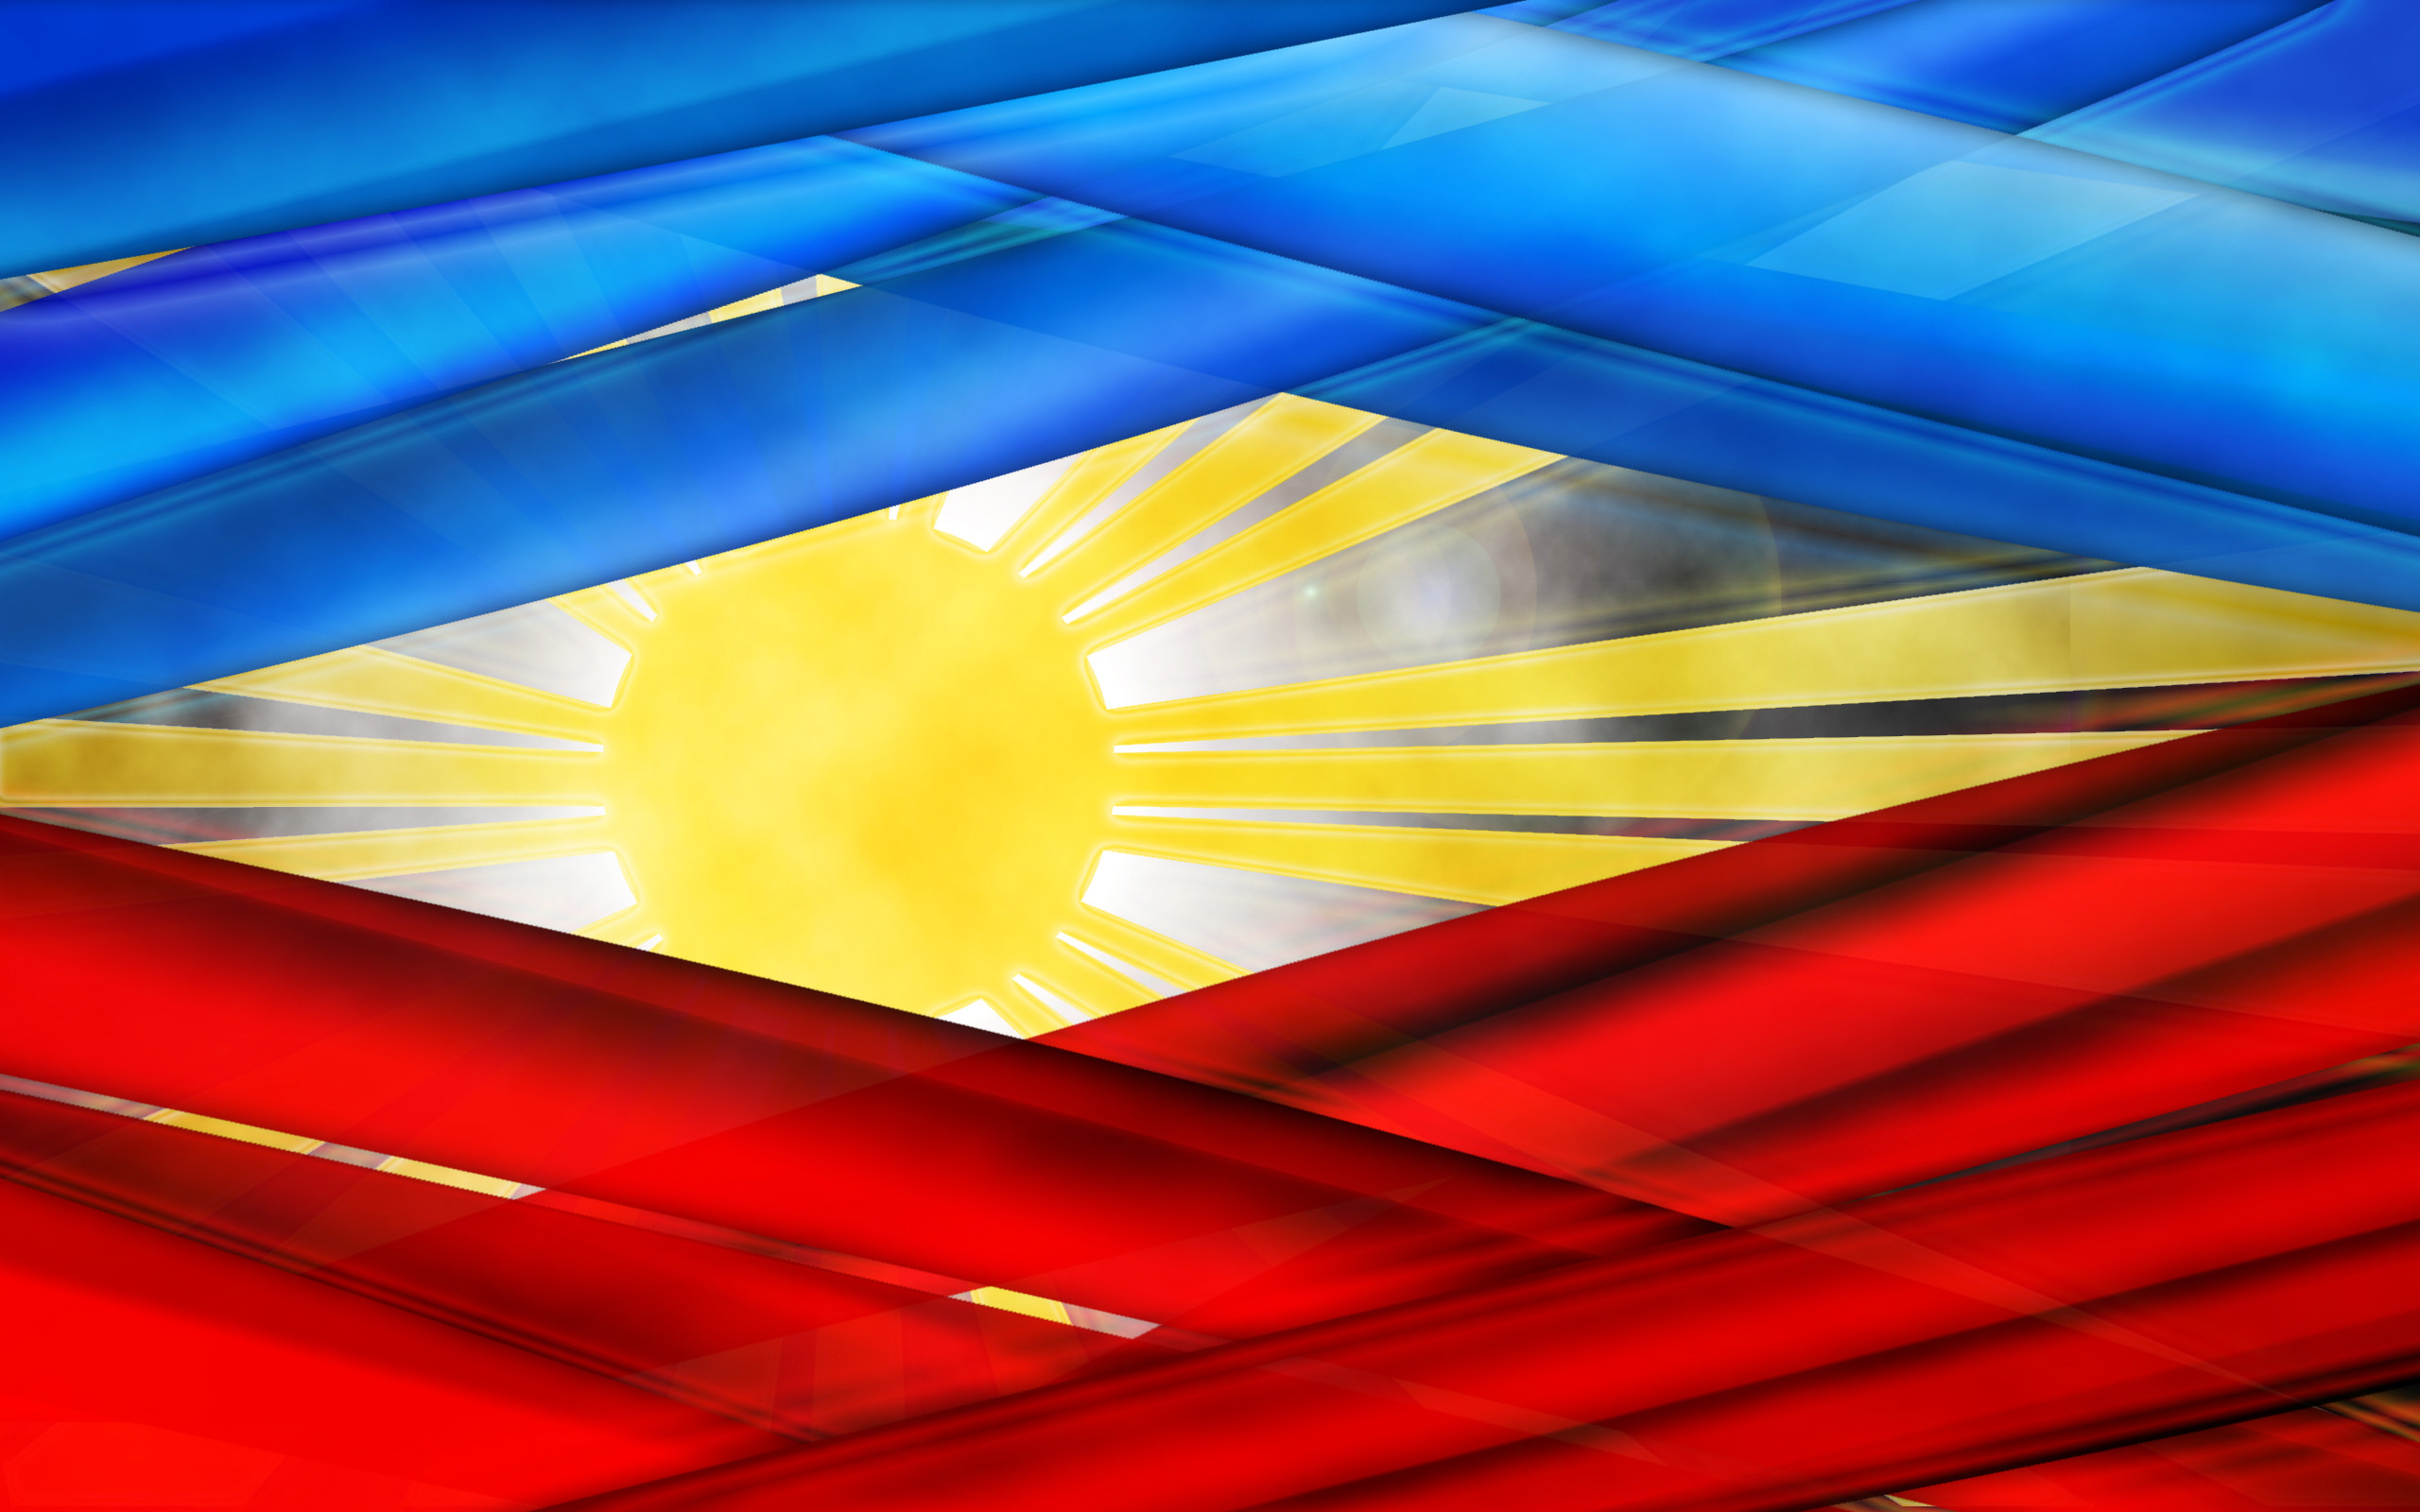 2560x1600 Wallpaper Engine - Flag of the Philippines - YouTube 66 best Philippines  and Filipinos etc images on Pinterest .